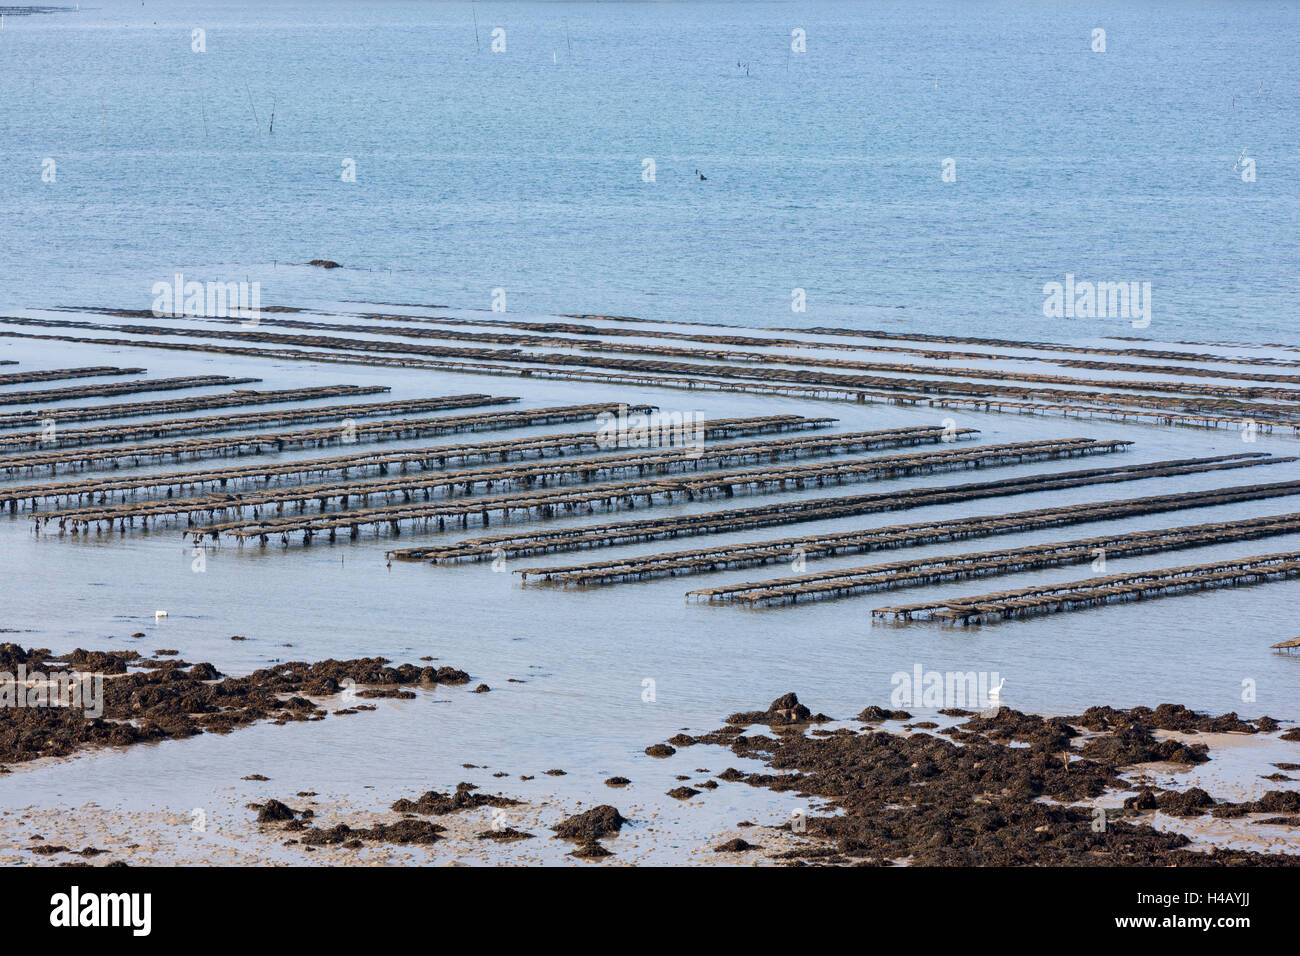 Oyster beds, Côtes des Abers, Brittany Stock Photo